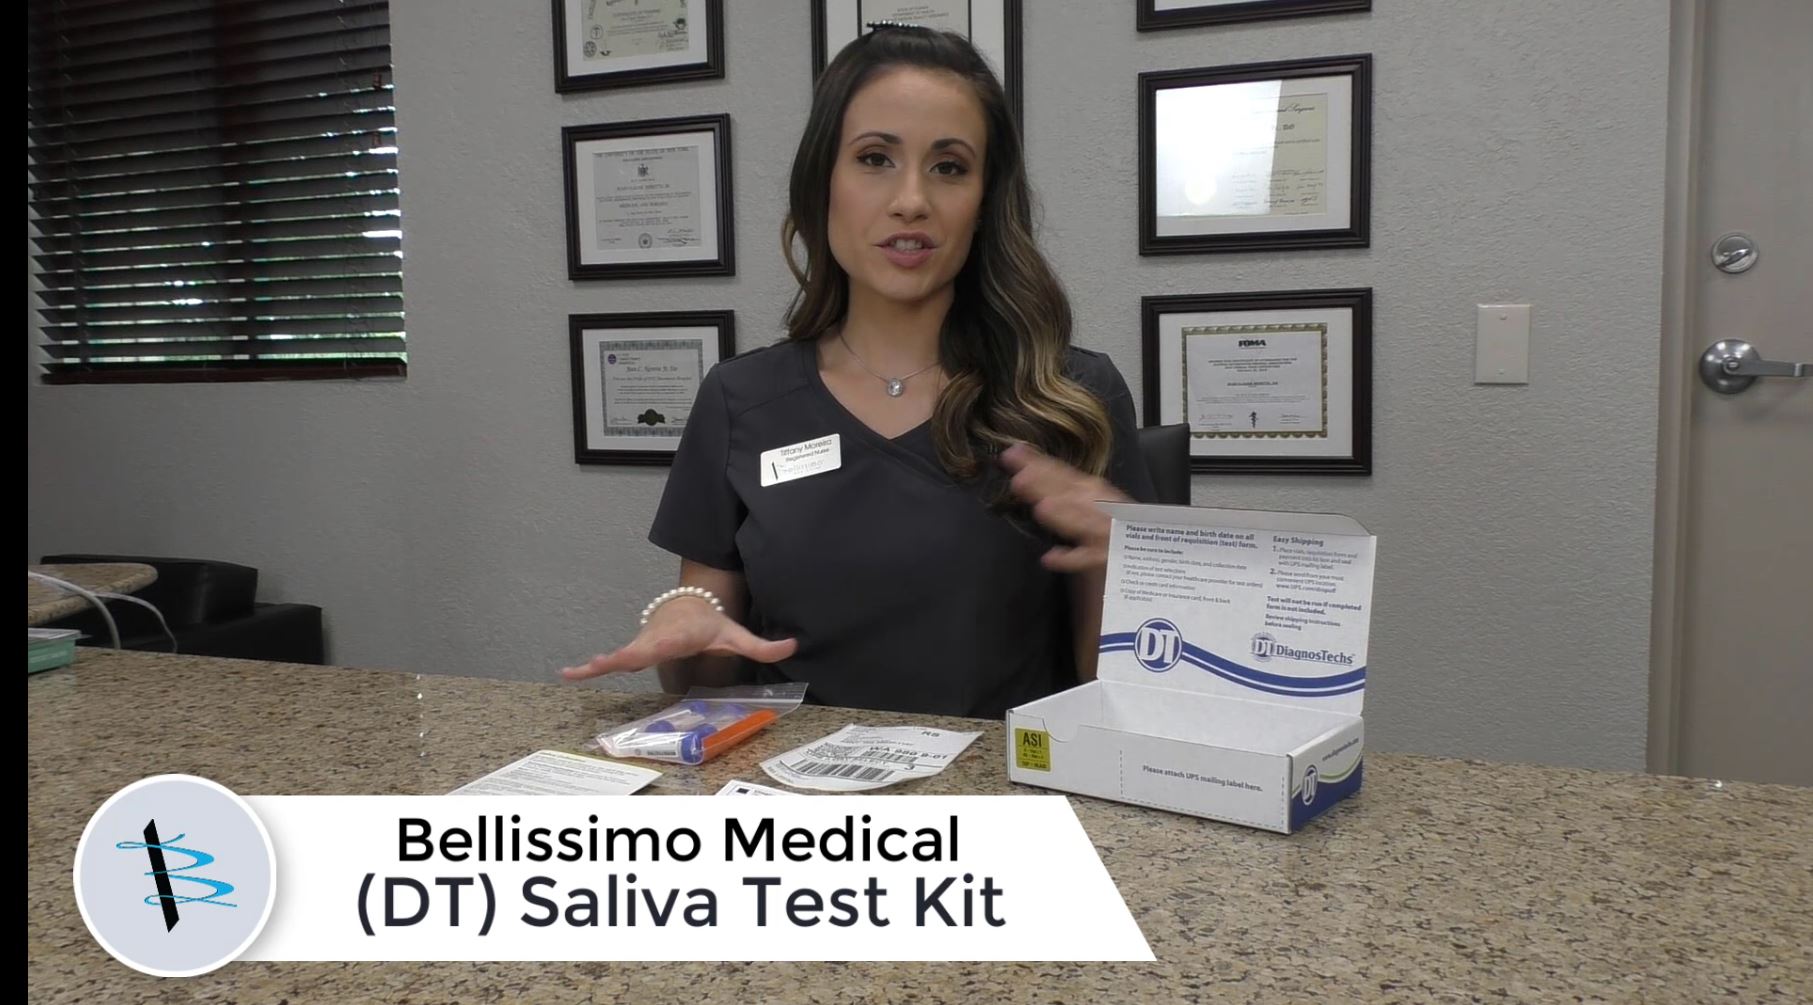 Tiffany (RN) gives the proper instructions on how to use the DT Saliva Test Kit